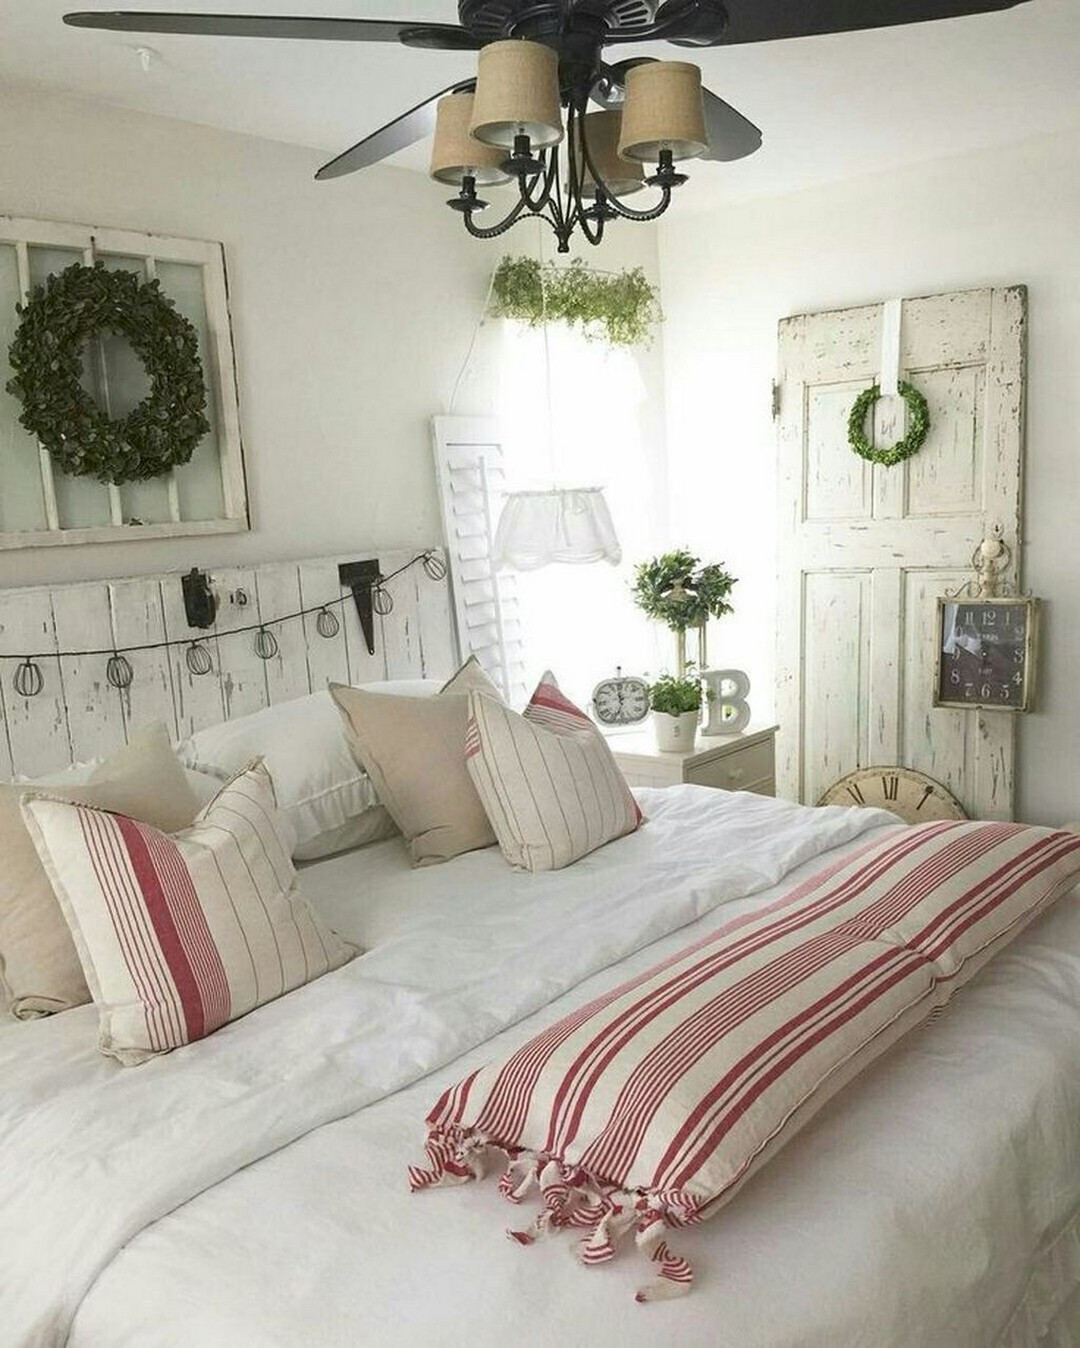 Rustic Farmhouse Bedroom
 Gorgeous Rustic Farmhouse Bedrooms to Manage in Your